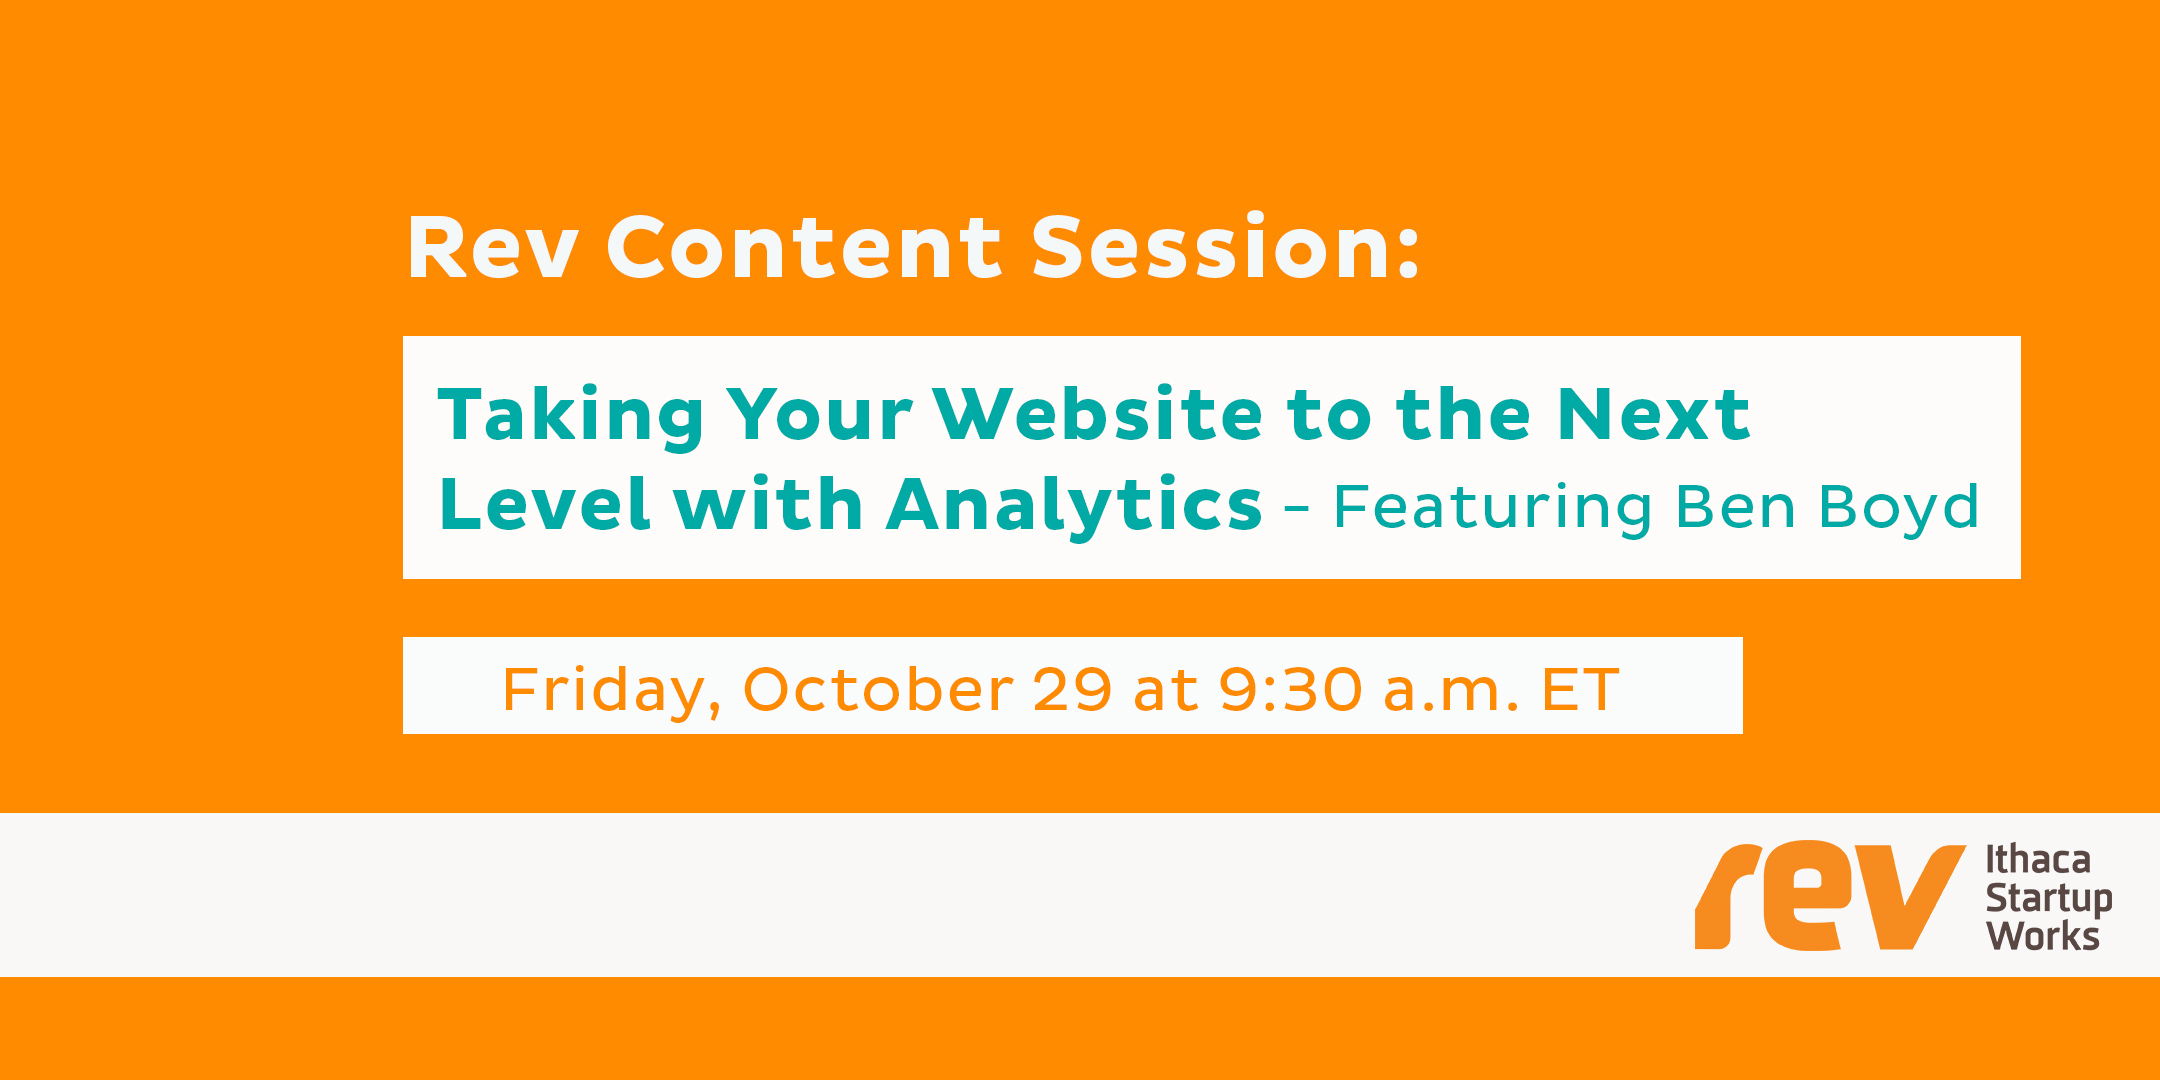 Rev Content Session: Taking Your Website to the Next Level with Analytics, featuring Ben Boyd. Friday, October 29 (9:30 a.m. ET). Rev: Ithaca Startup Works